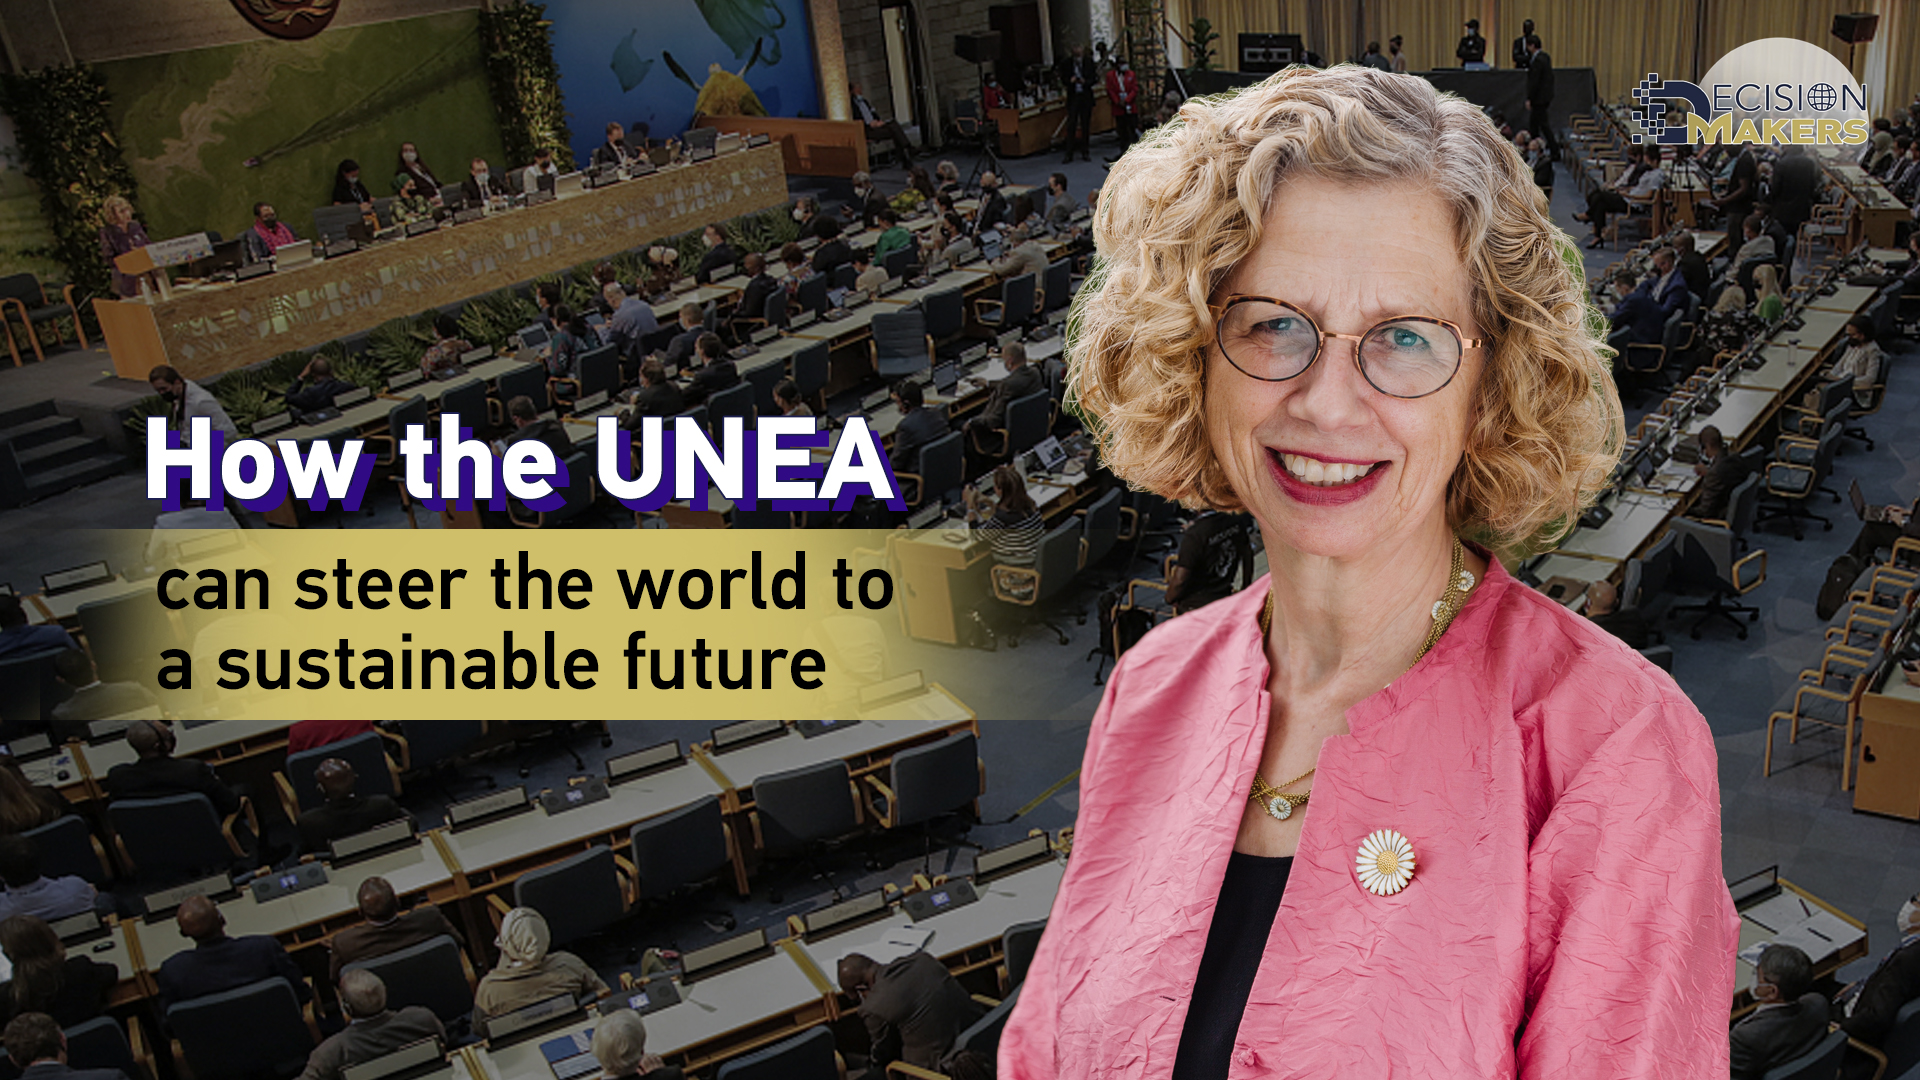 How the UNEA can steer the world to a sustainable future